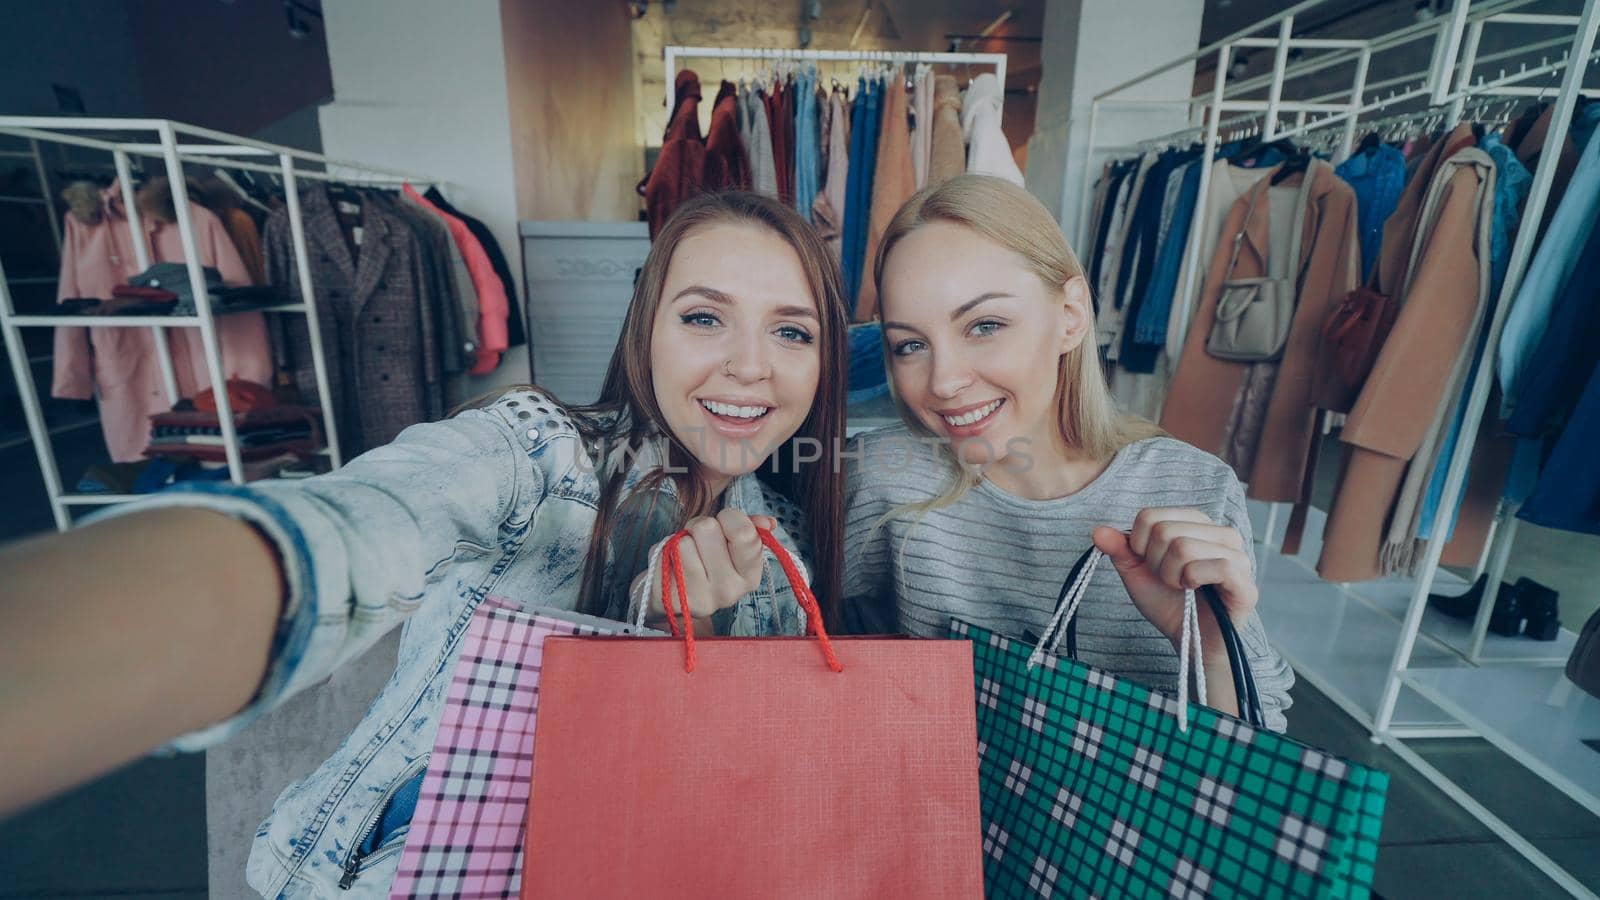 Point of view shot of two attractive careless girls making selfie with paper bags in women's clothes shop. Friends are posing, laughing and chatting happily by silverkblack